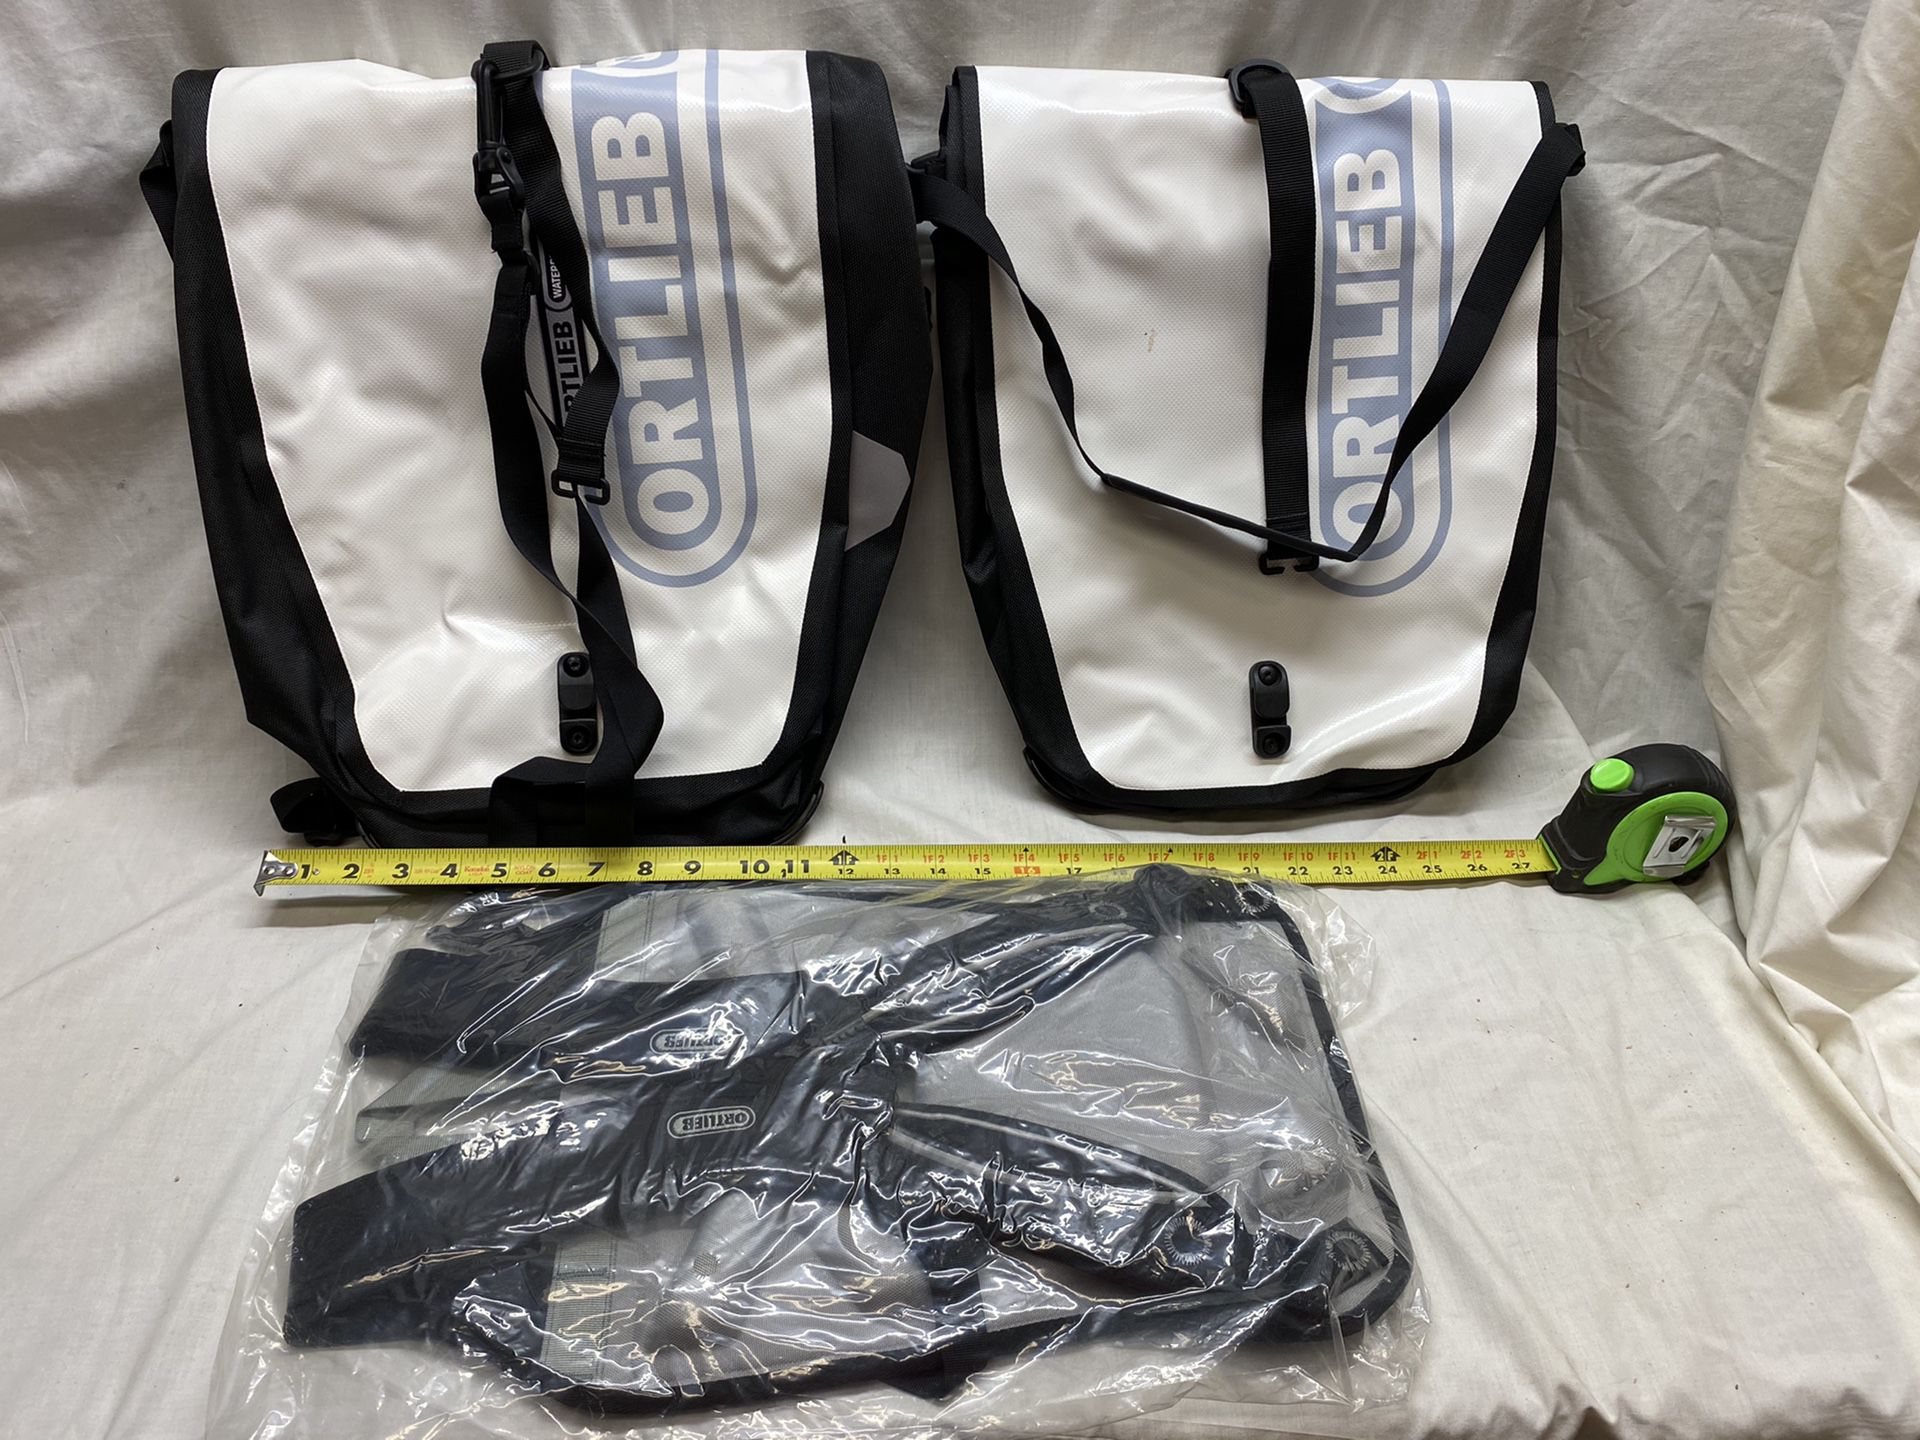 Ortlieb bicycle panniers/bags, New.